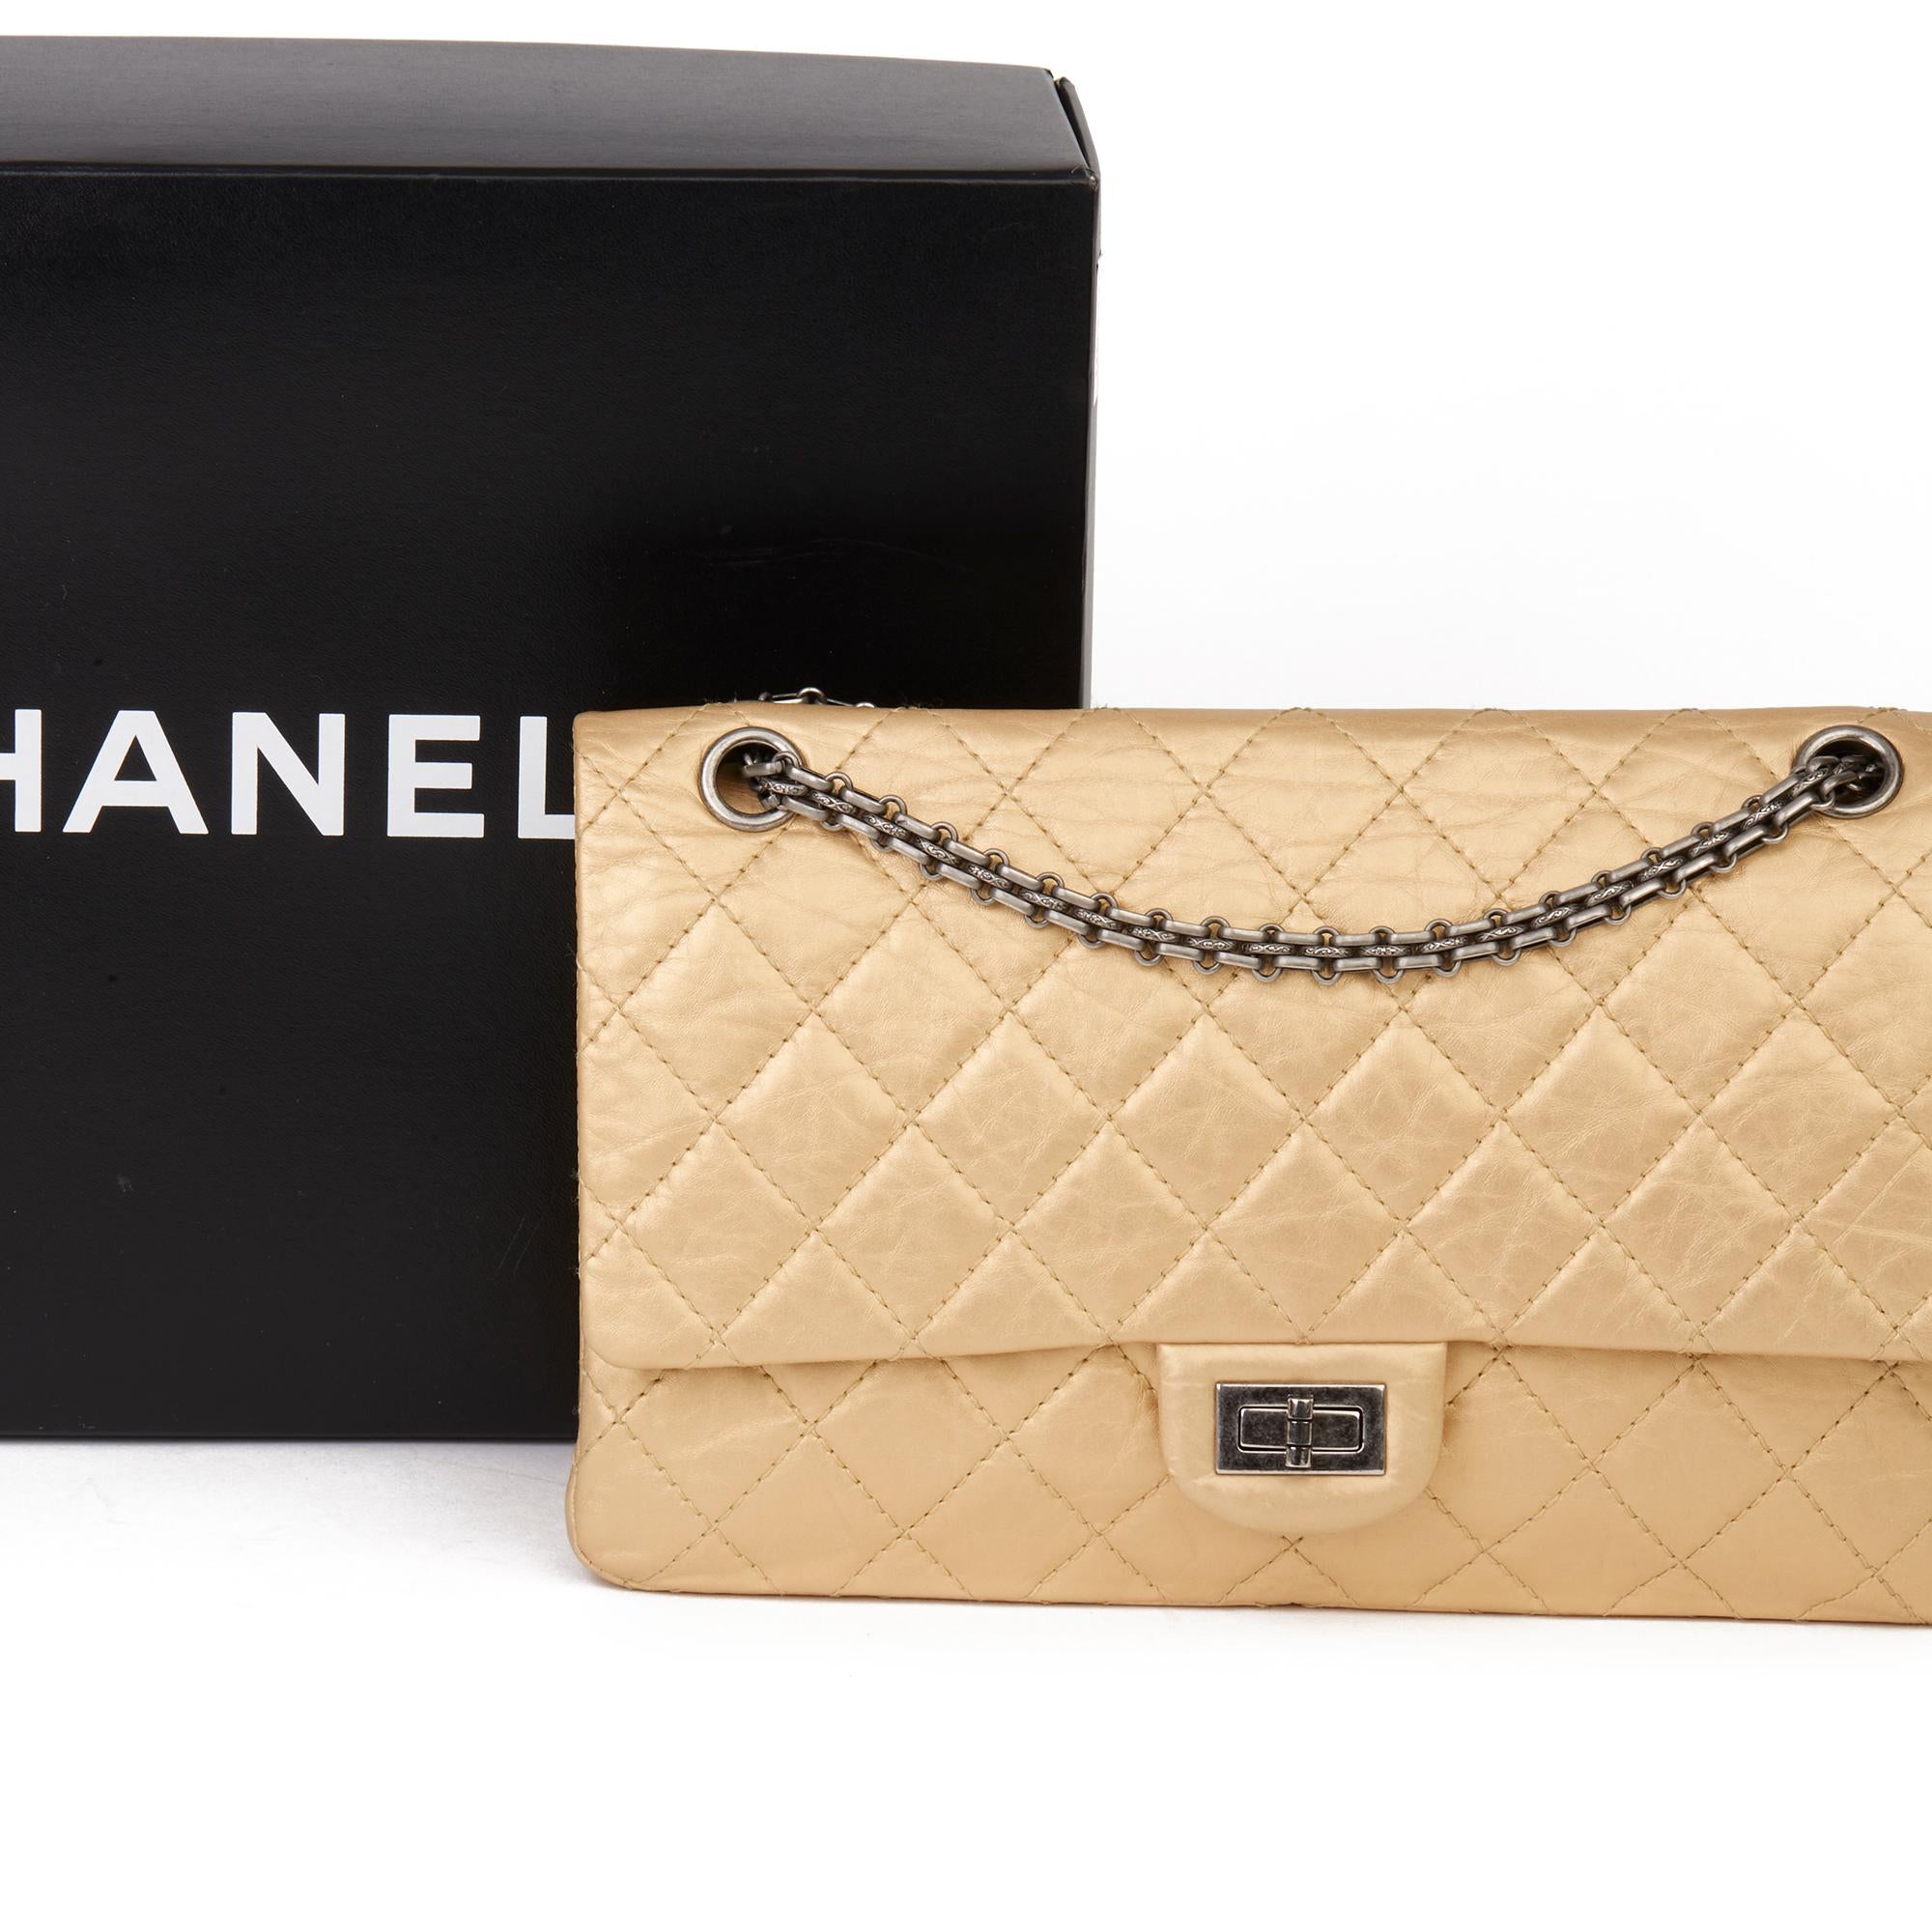 2009 Chanel Gold Metallic Aged Calfskin Leather 2.55 Reissue 226 Double Flap Bag 8